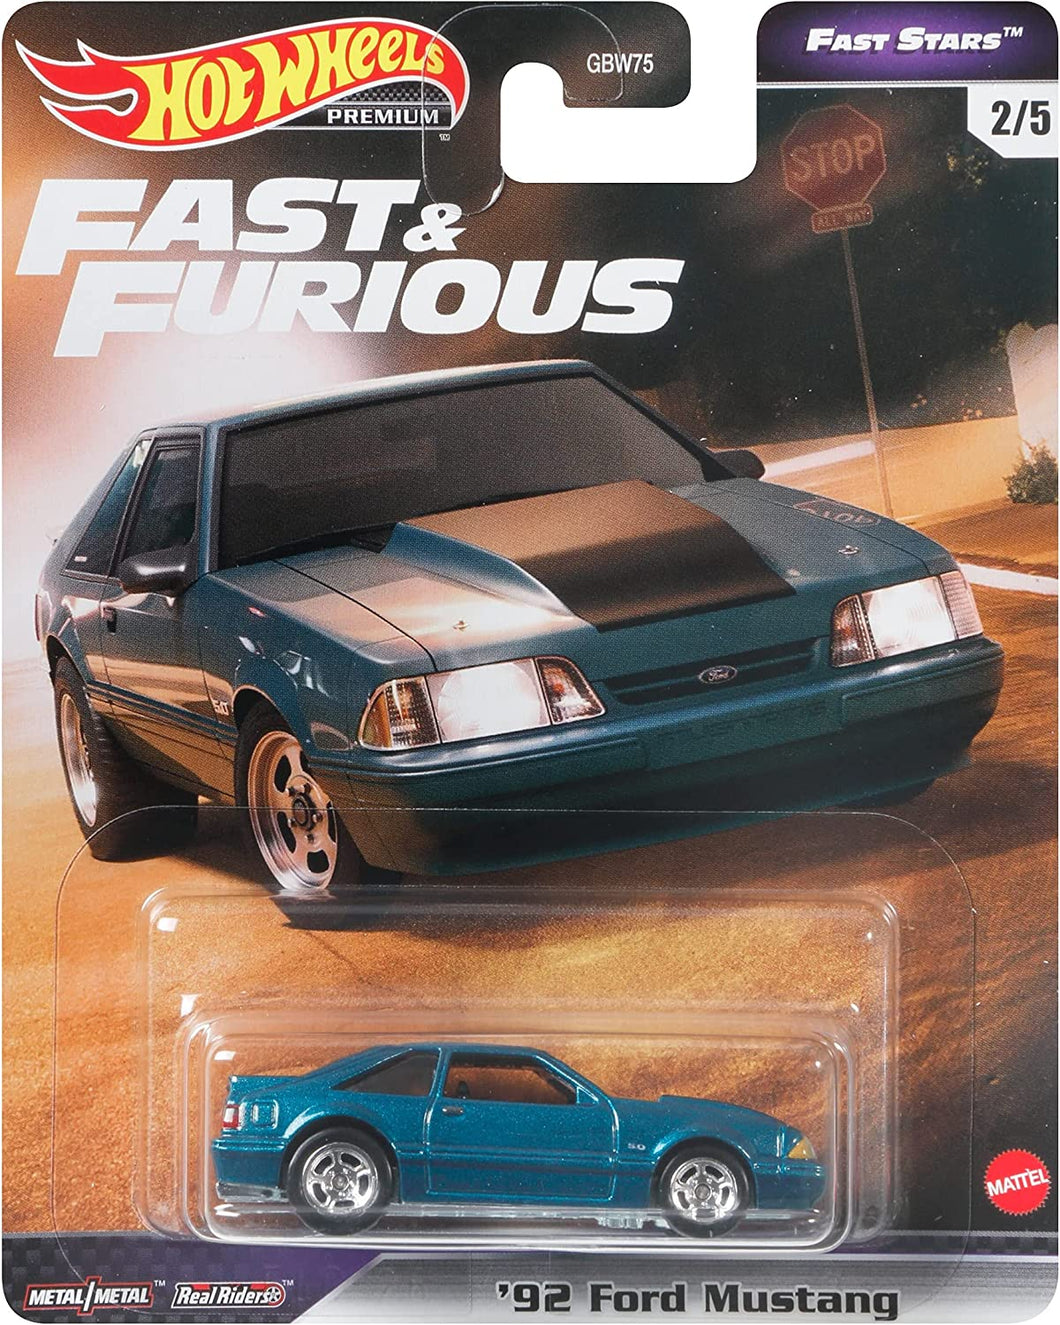 Hot Wheels Premium Fast & Furious Fast Stars '92 Ford Mustang